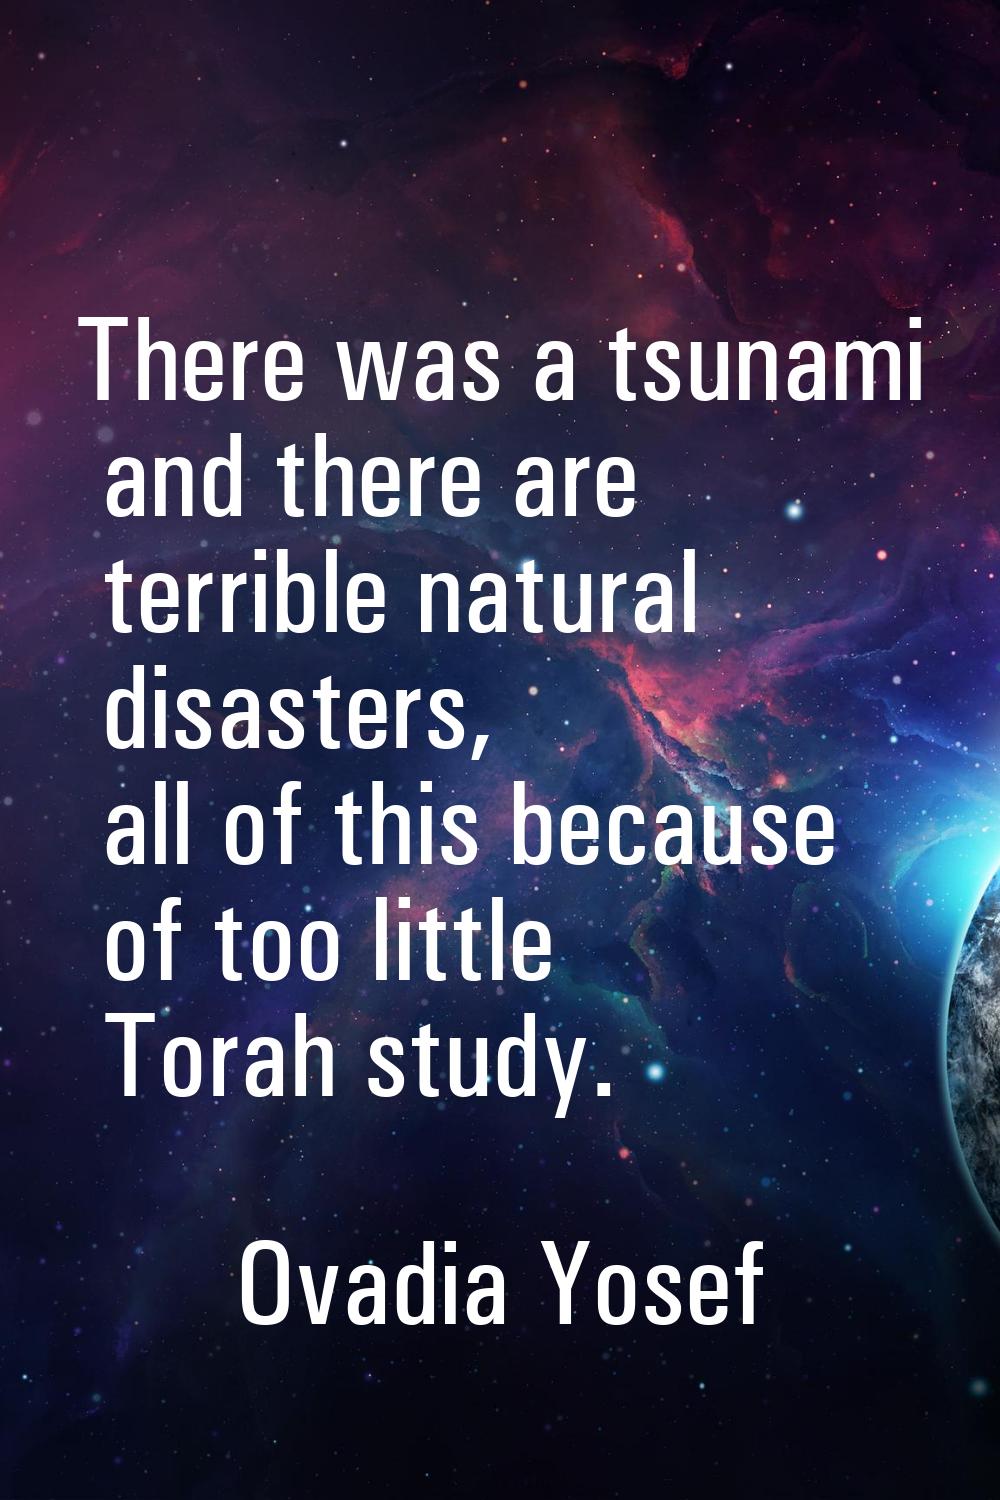 There was a tsunami and there are terrible natural disasters, all of this because of too little Tor